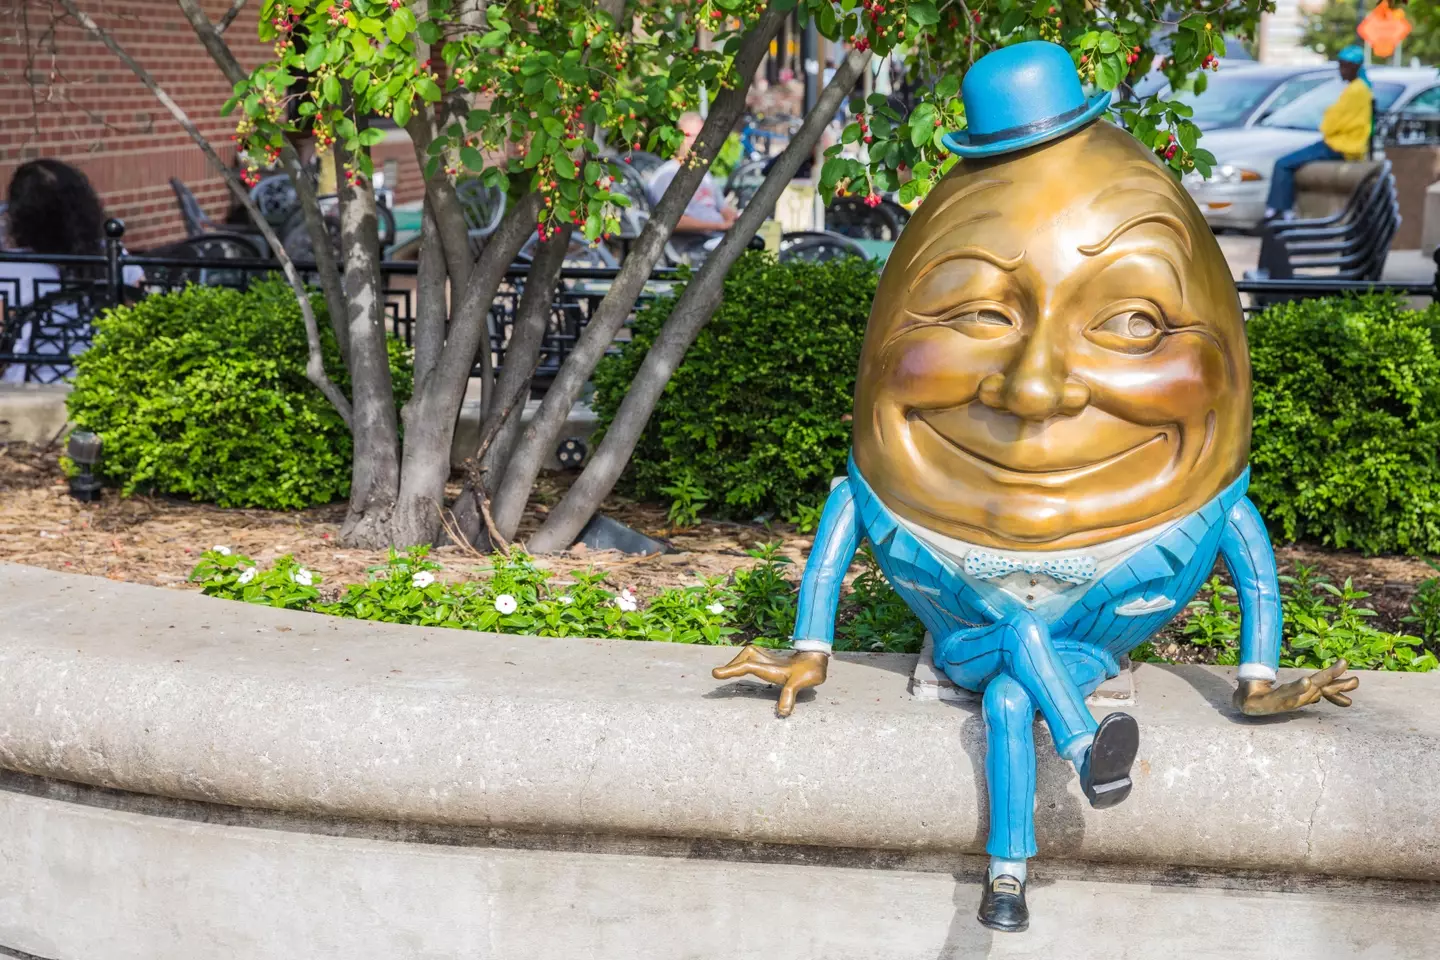 Don't fall for the lies, Humpty Dumpty is not and never was an egg.